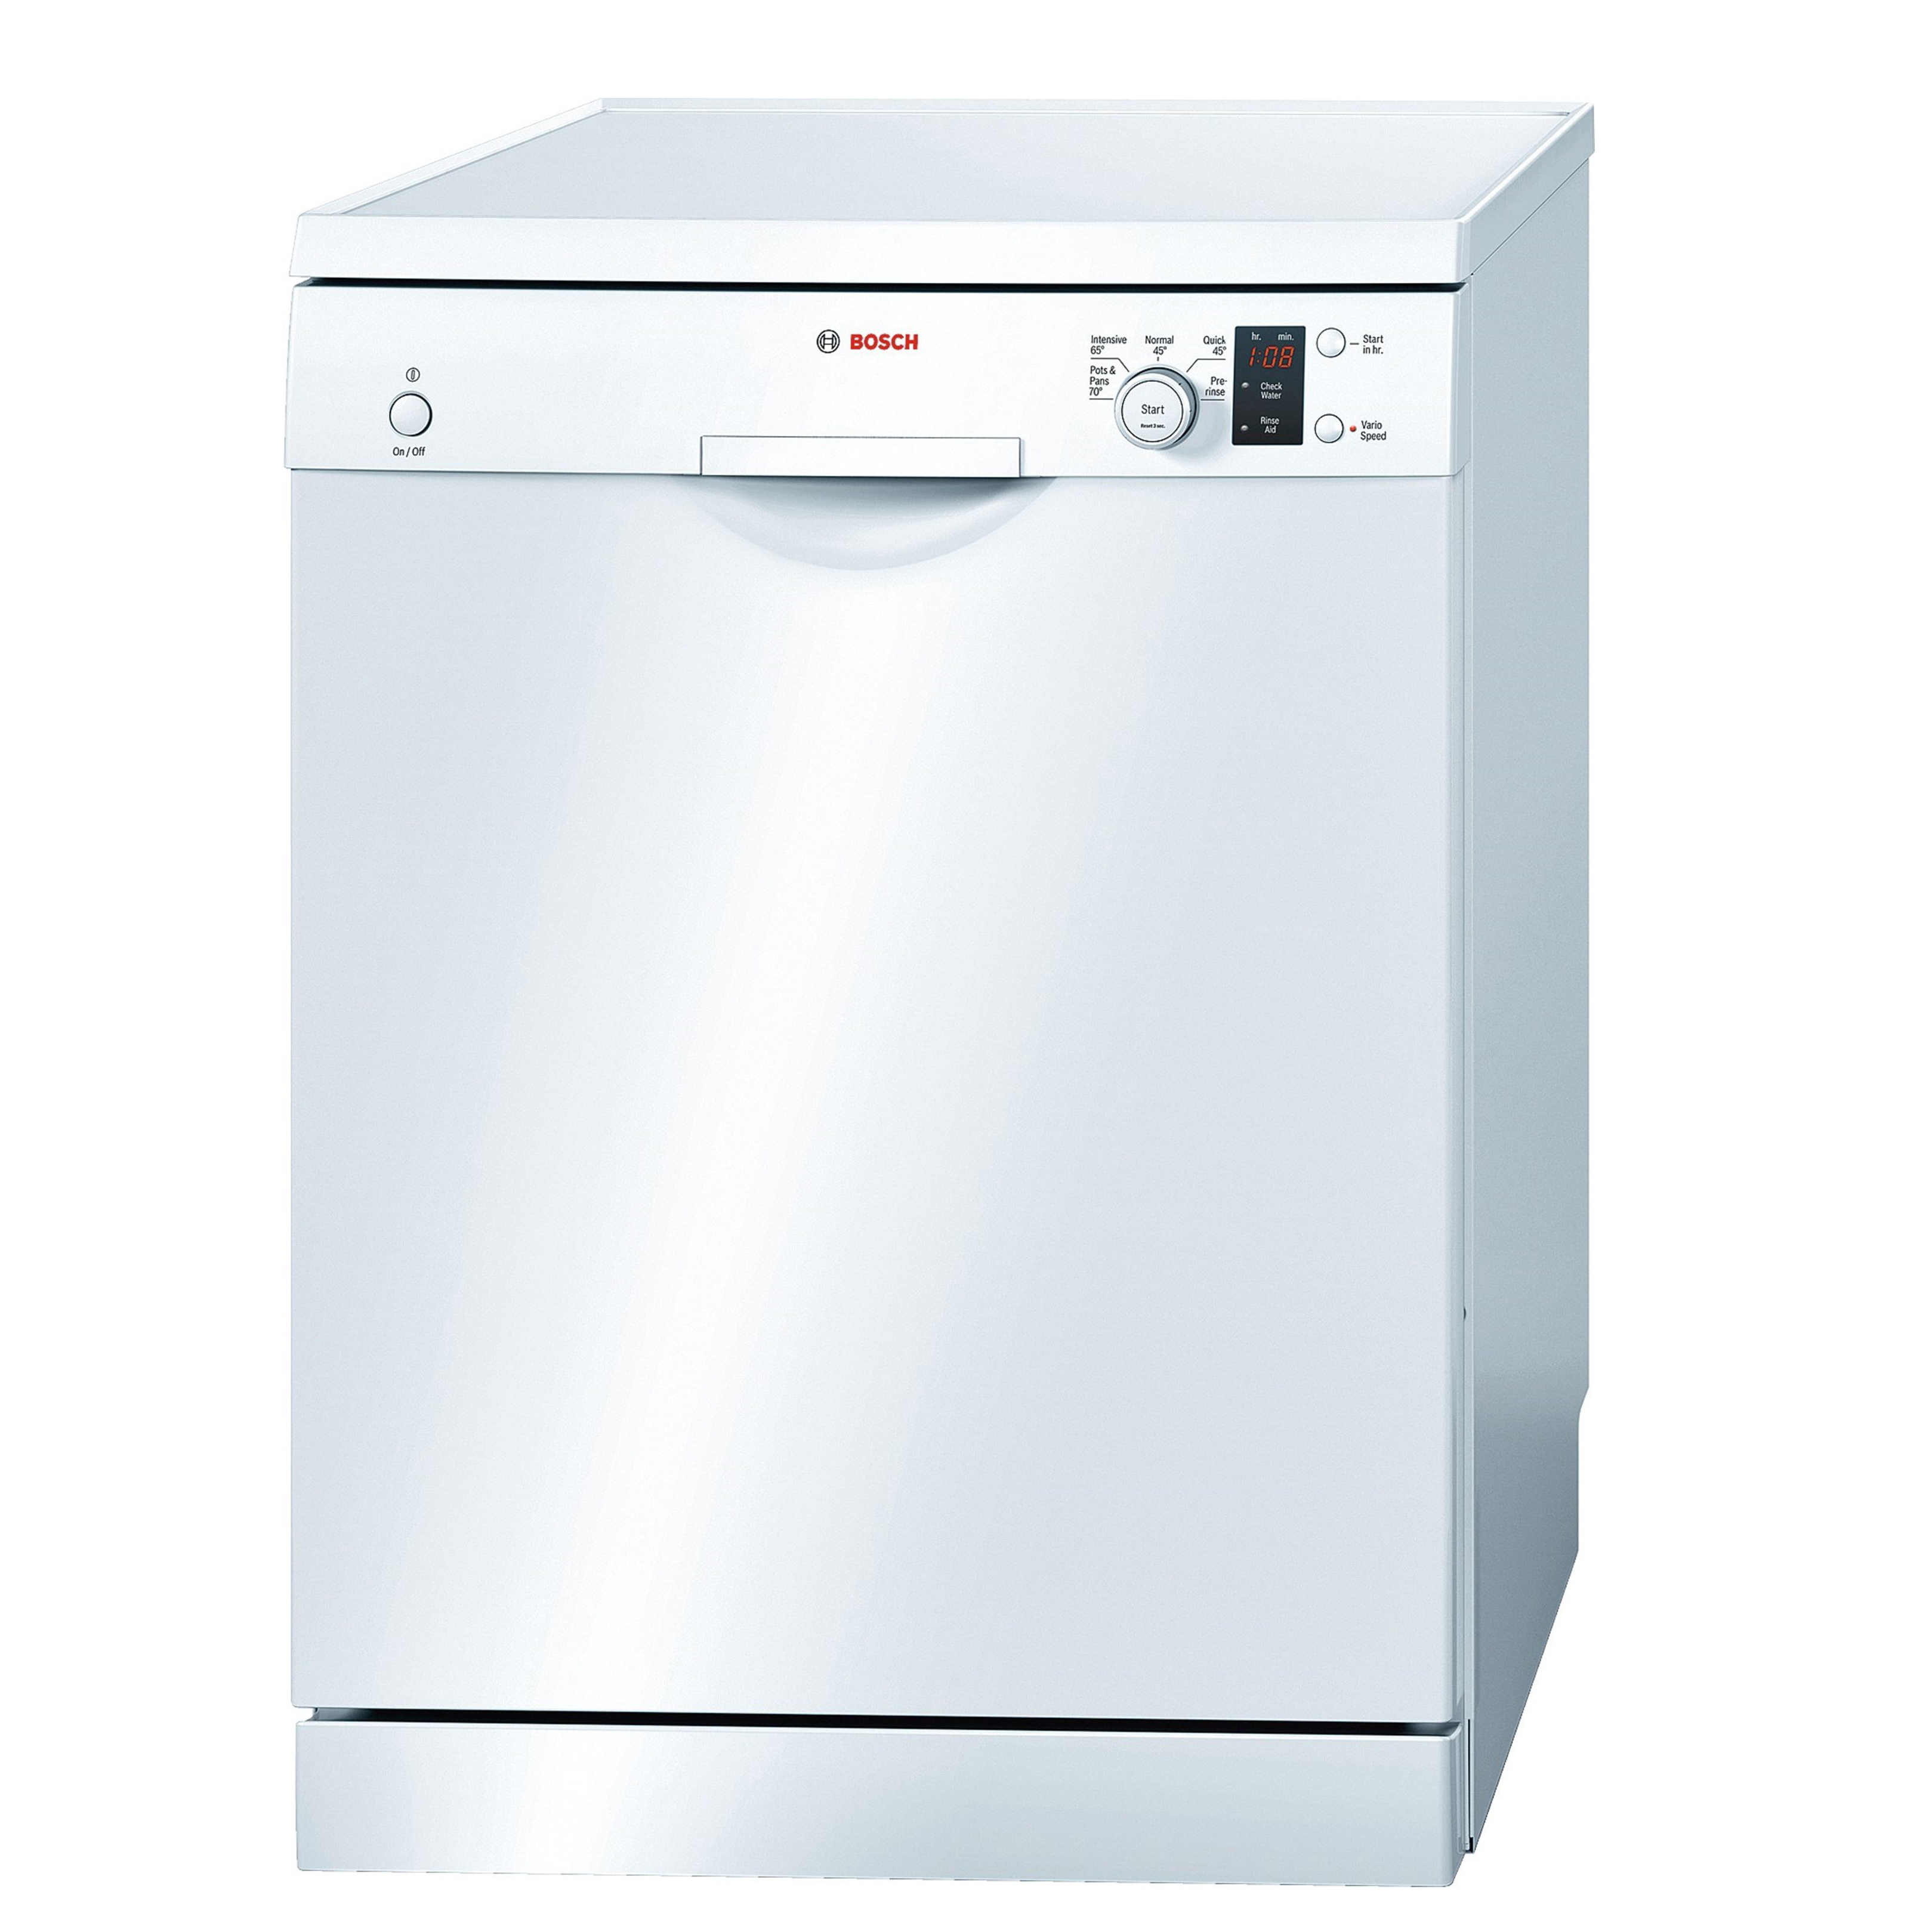 BOSCH Free Standing Dishwasher, White, SMS43D02ME